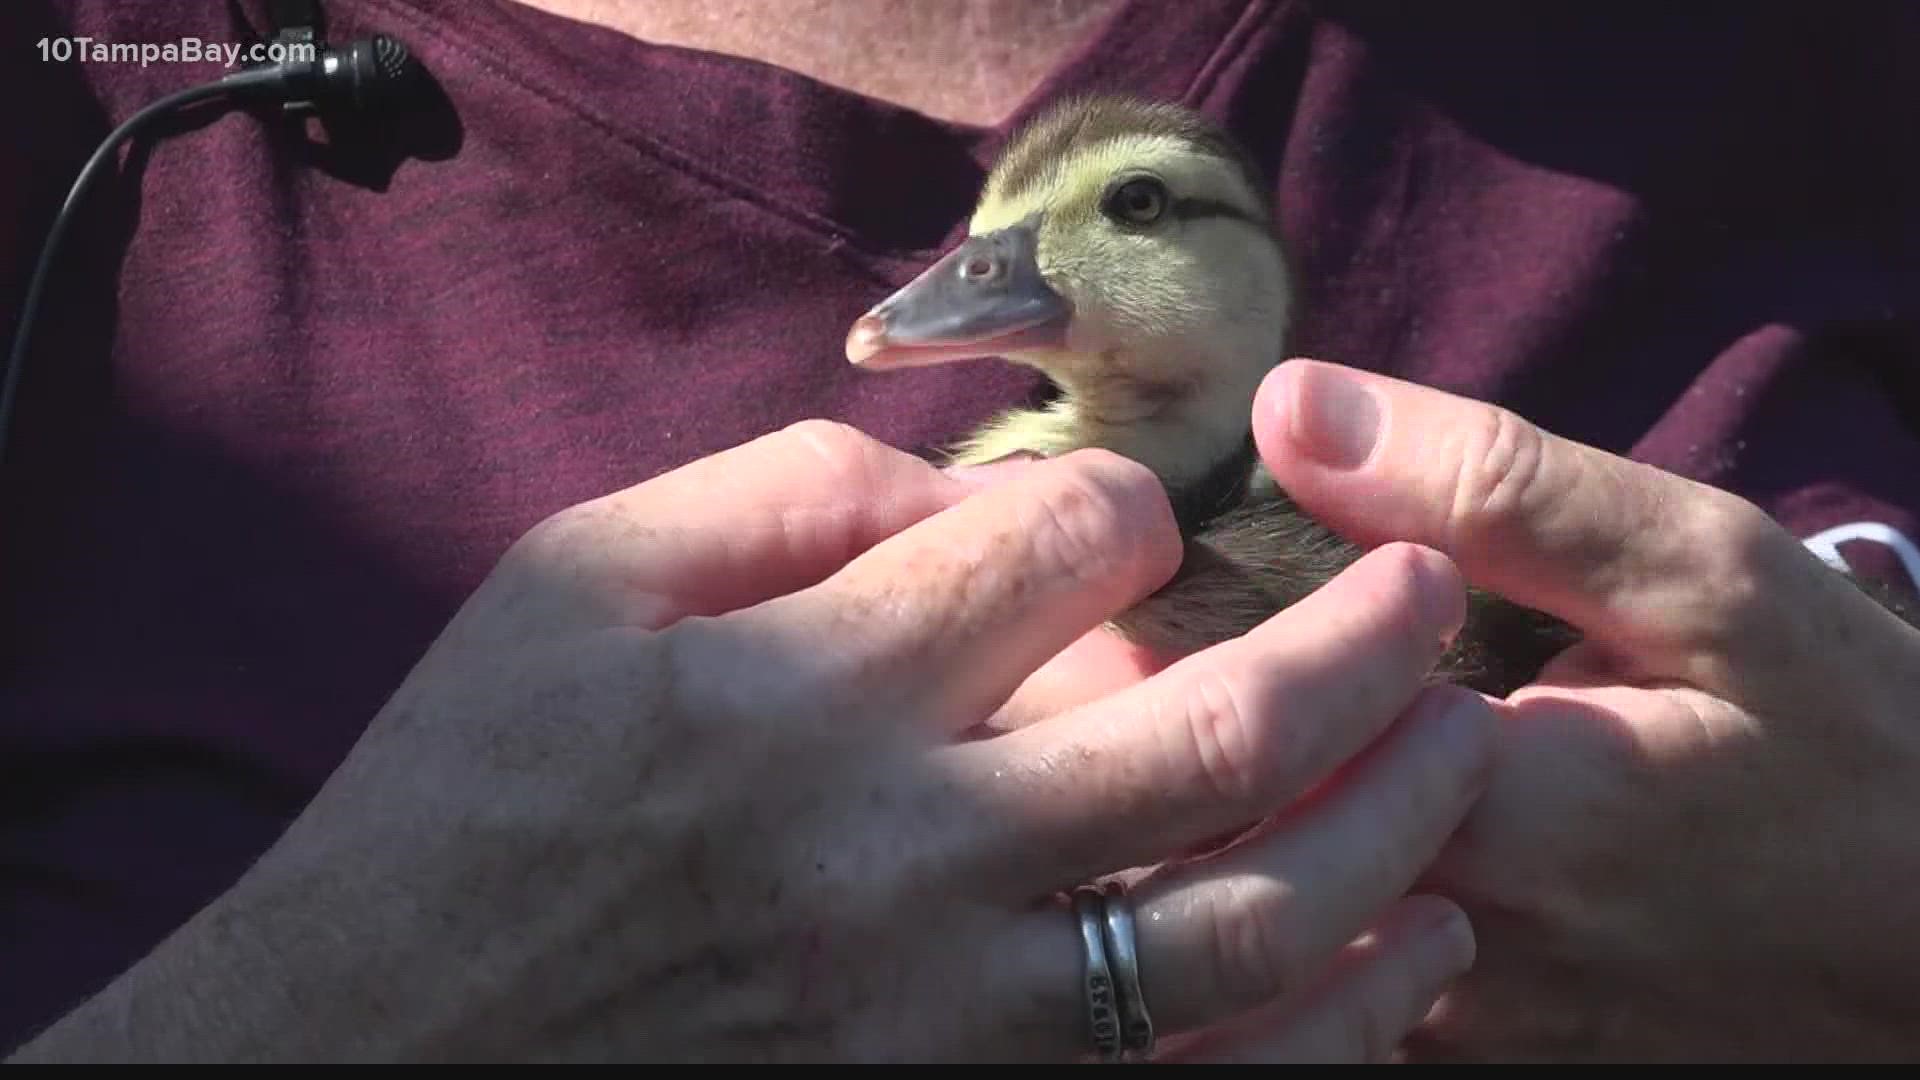 Gail Dixon couldn't stand the thought of her favorite animals being caught and euthanized by trappers. So, she started a duck sanctuary behind her home.